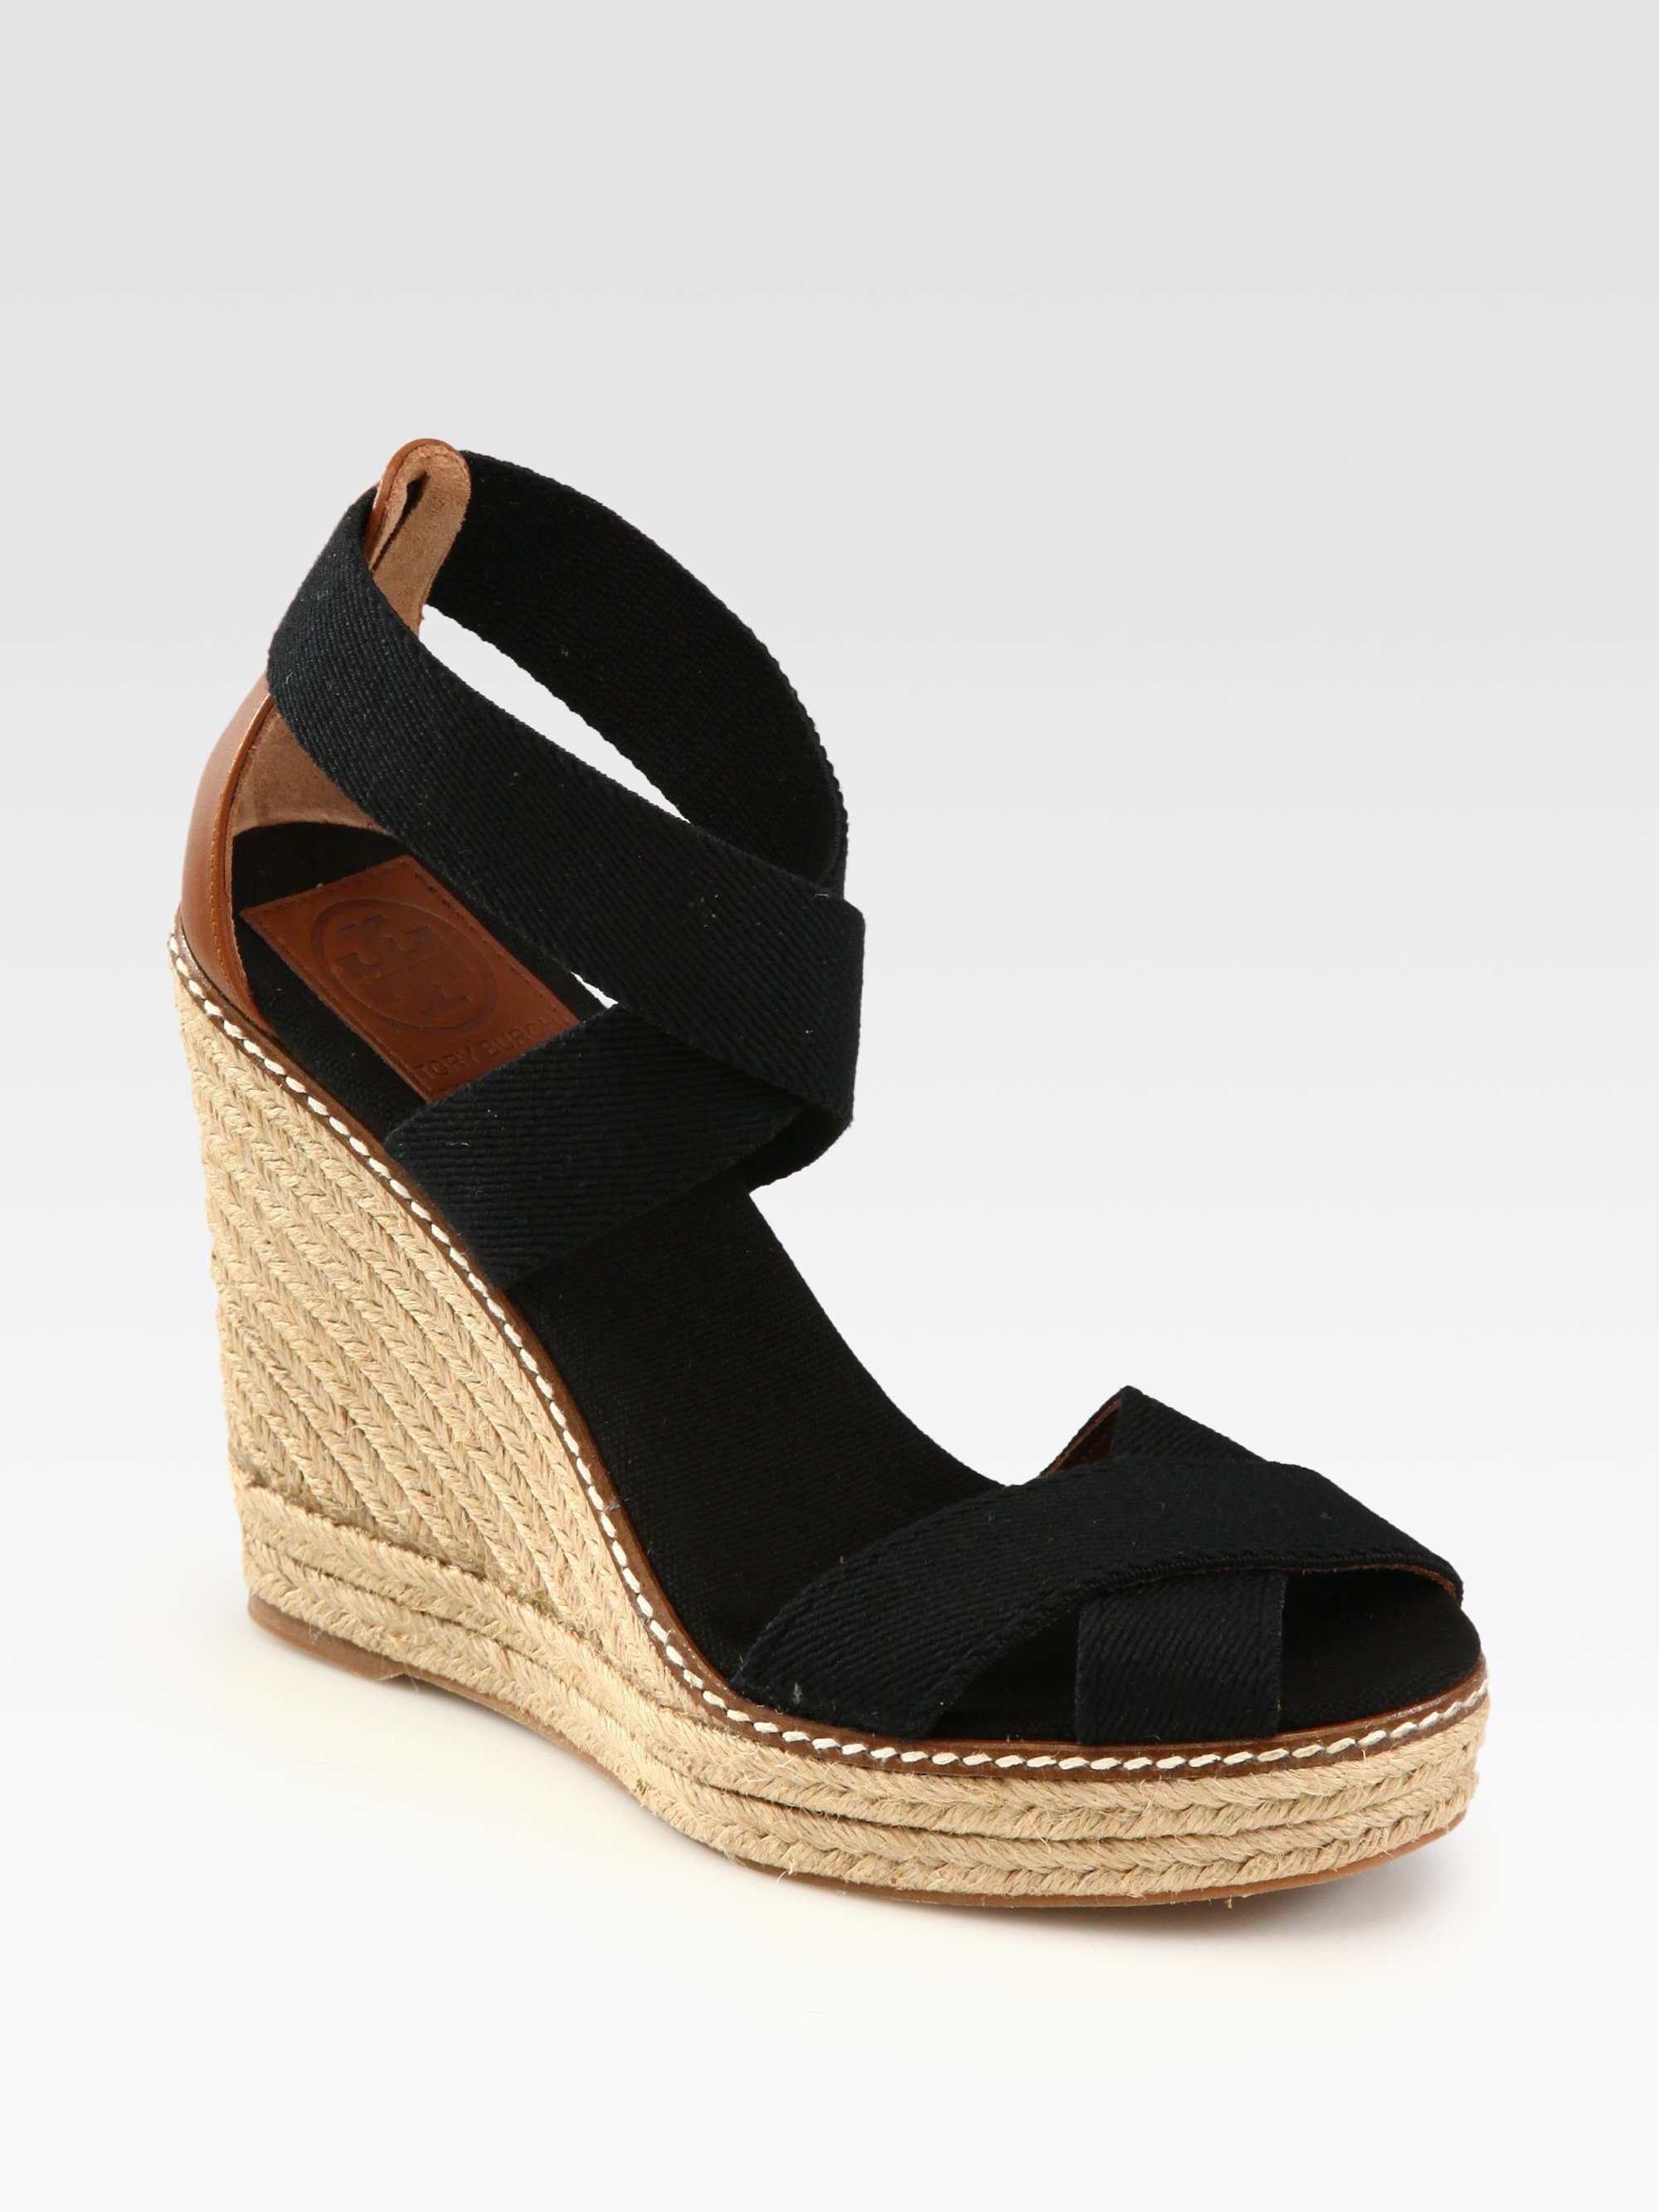 Tory Burch Adonis Canvas Espadrille Wedges in Black | Lyst